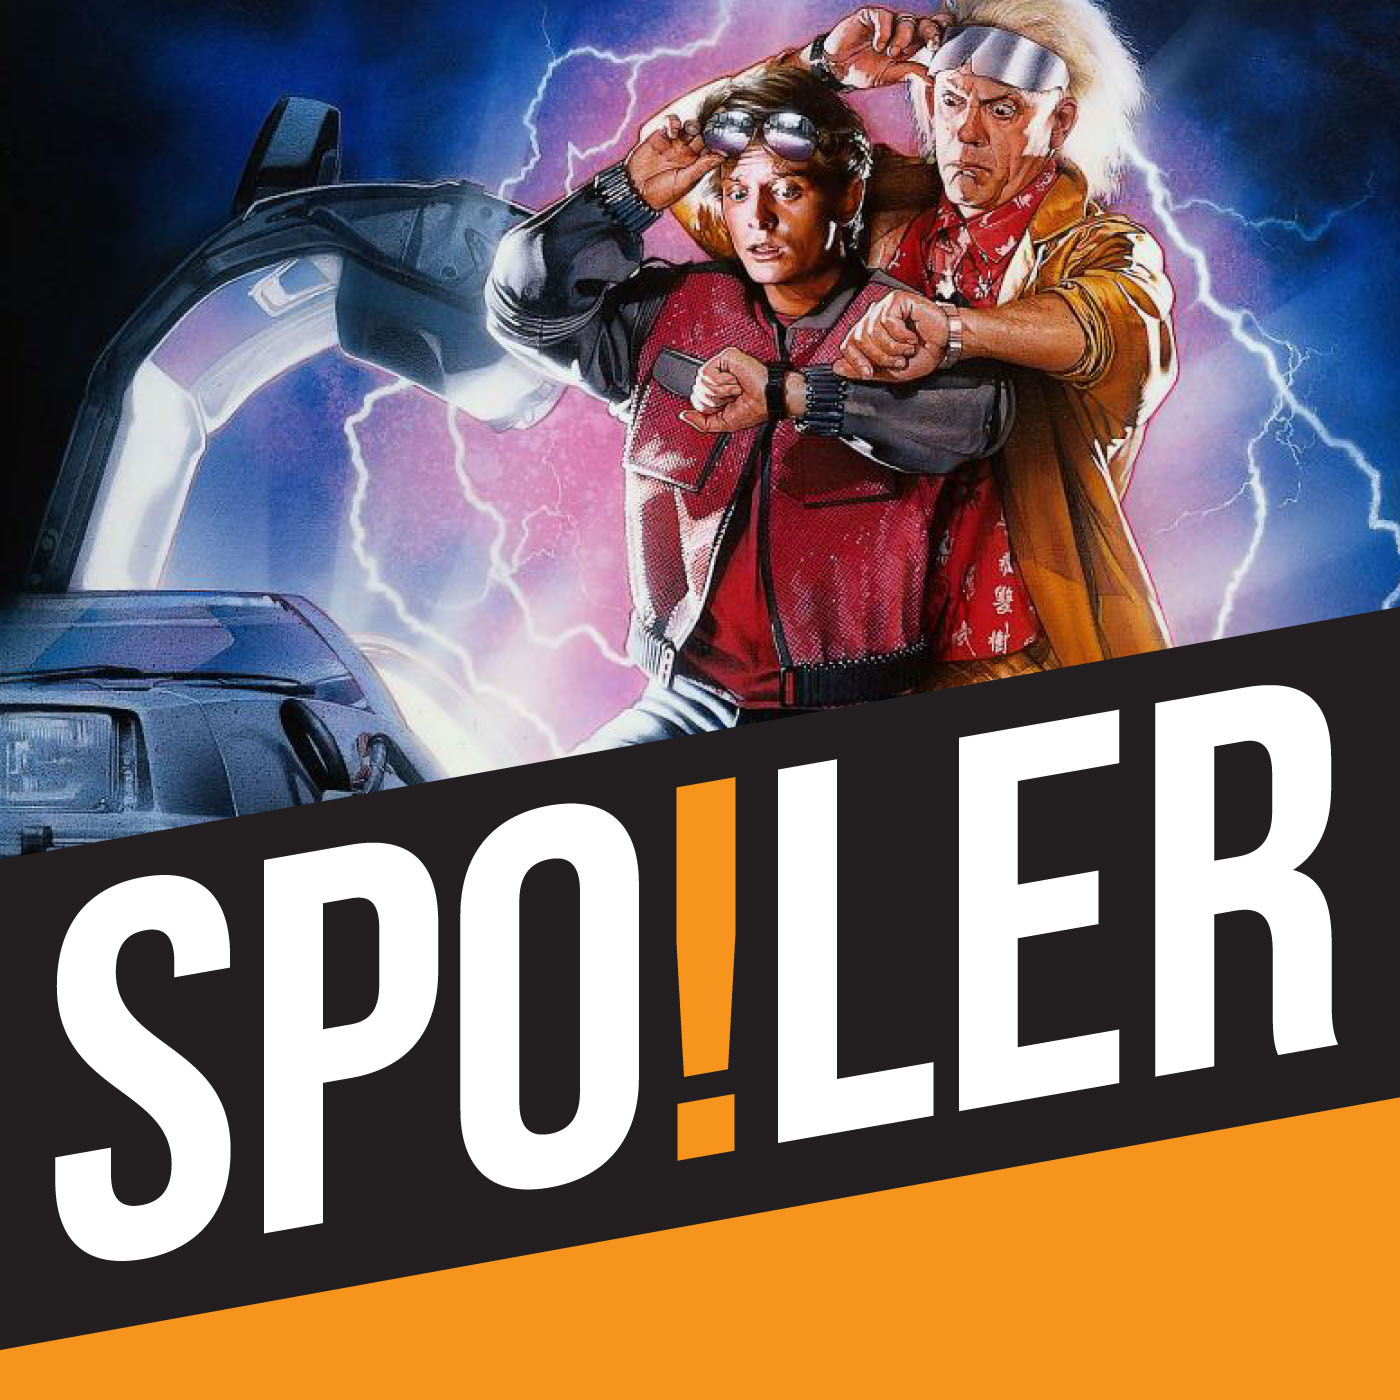 Back To The Future Trilogy: SPOILER Episode 3